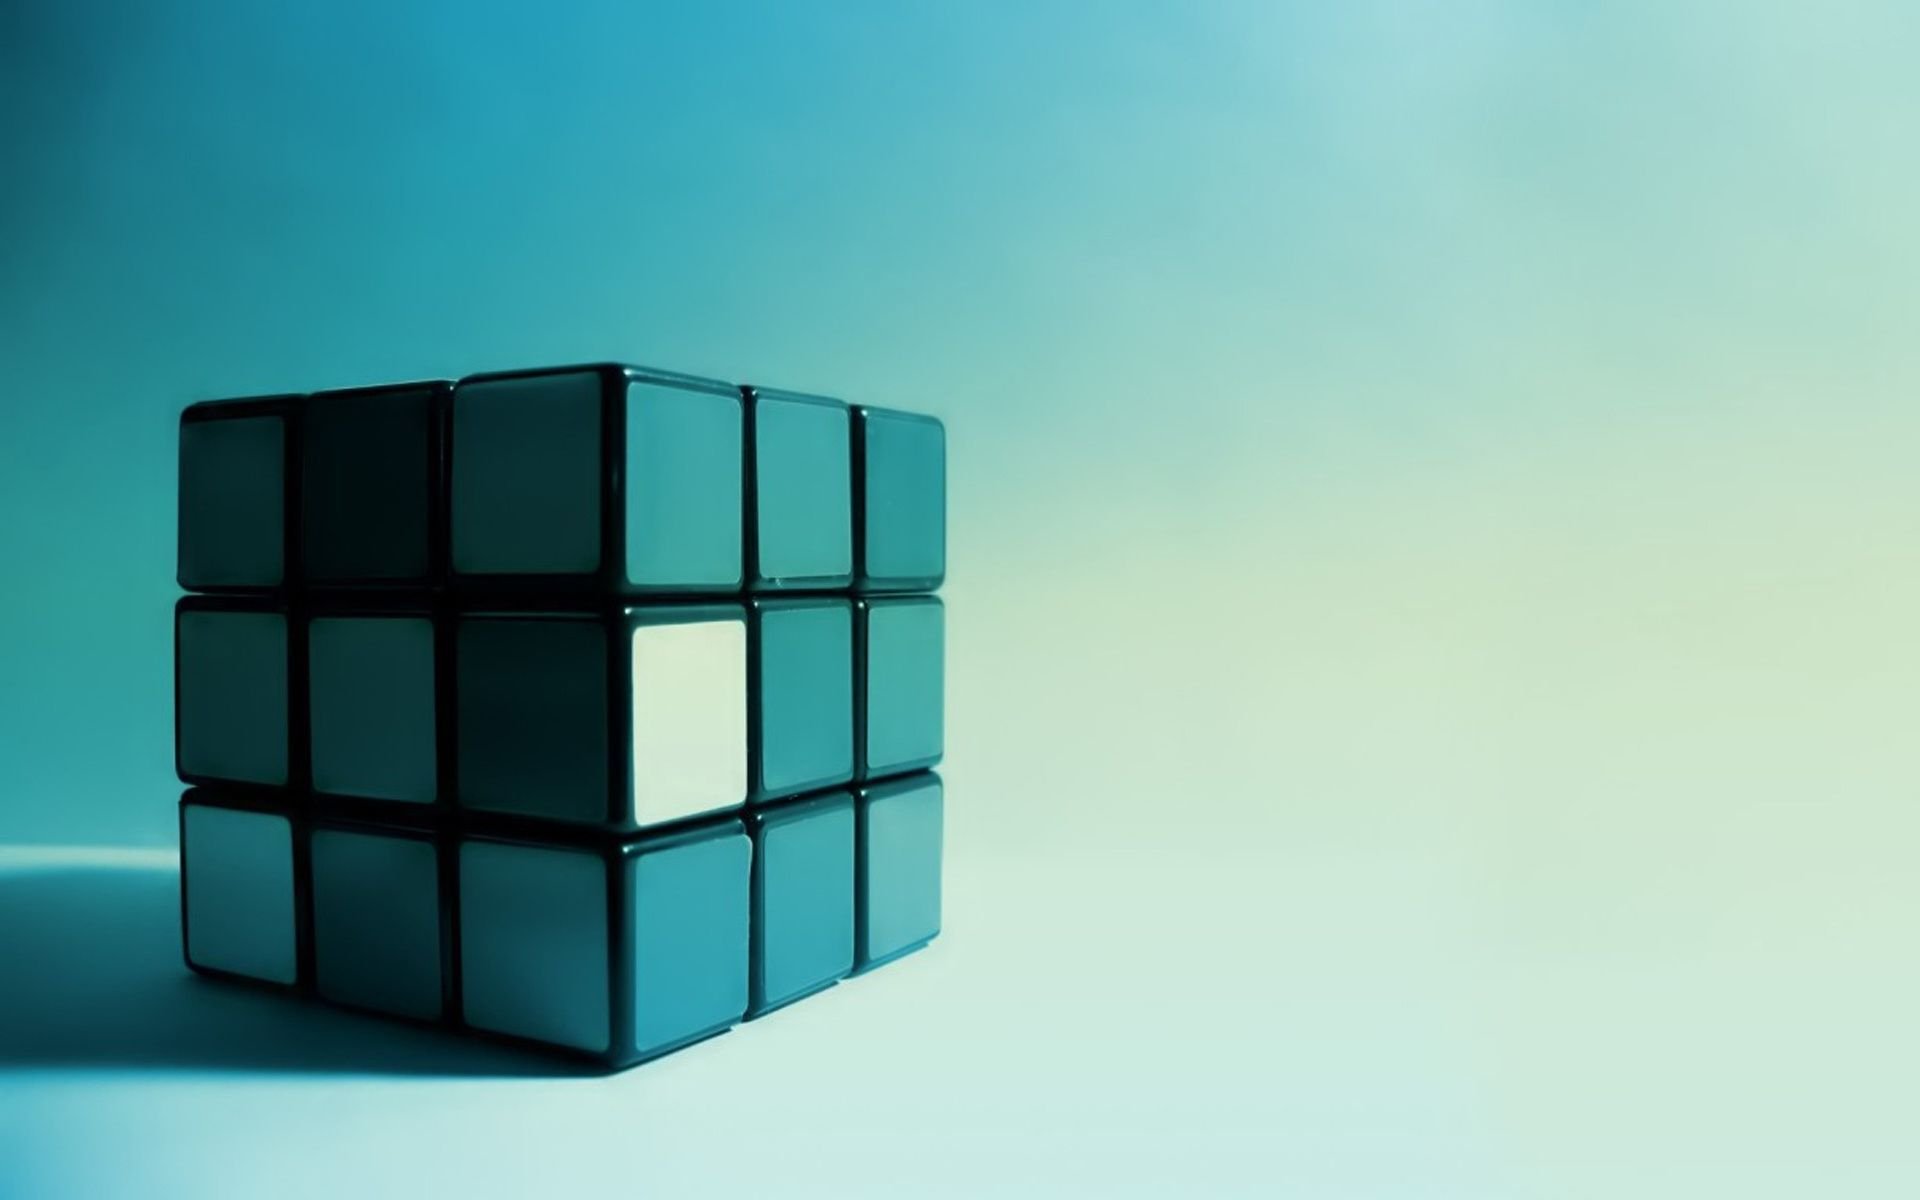 rubix cube Wallpaper and Background Image | 1366x768 | ID:481558